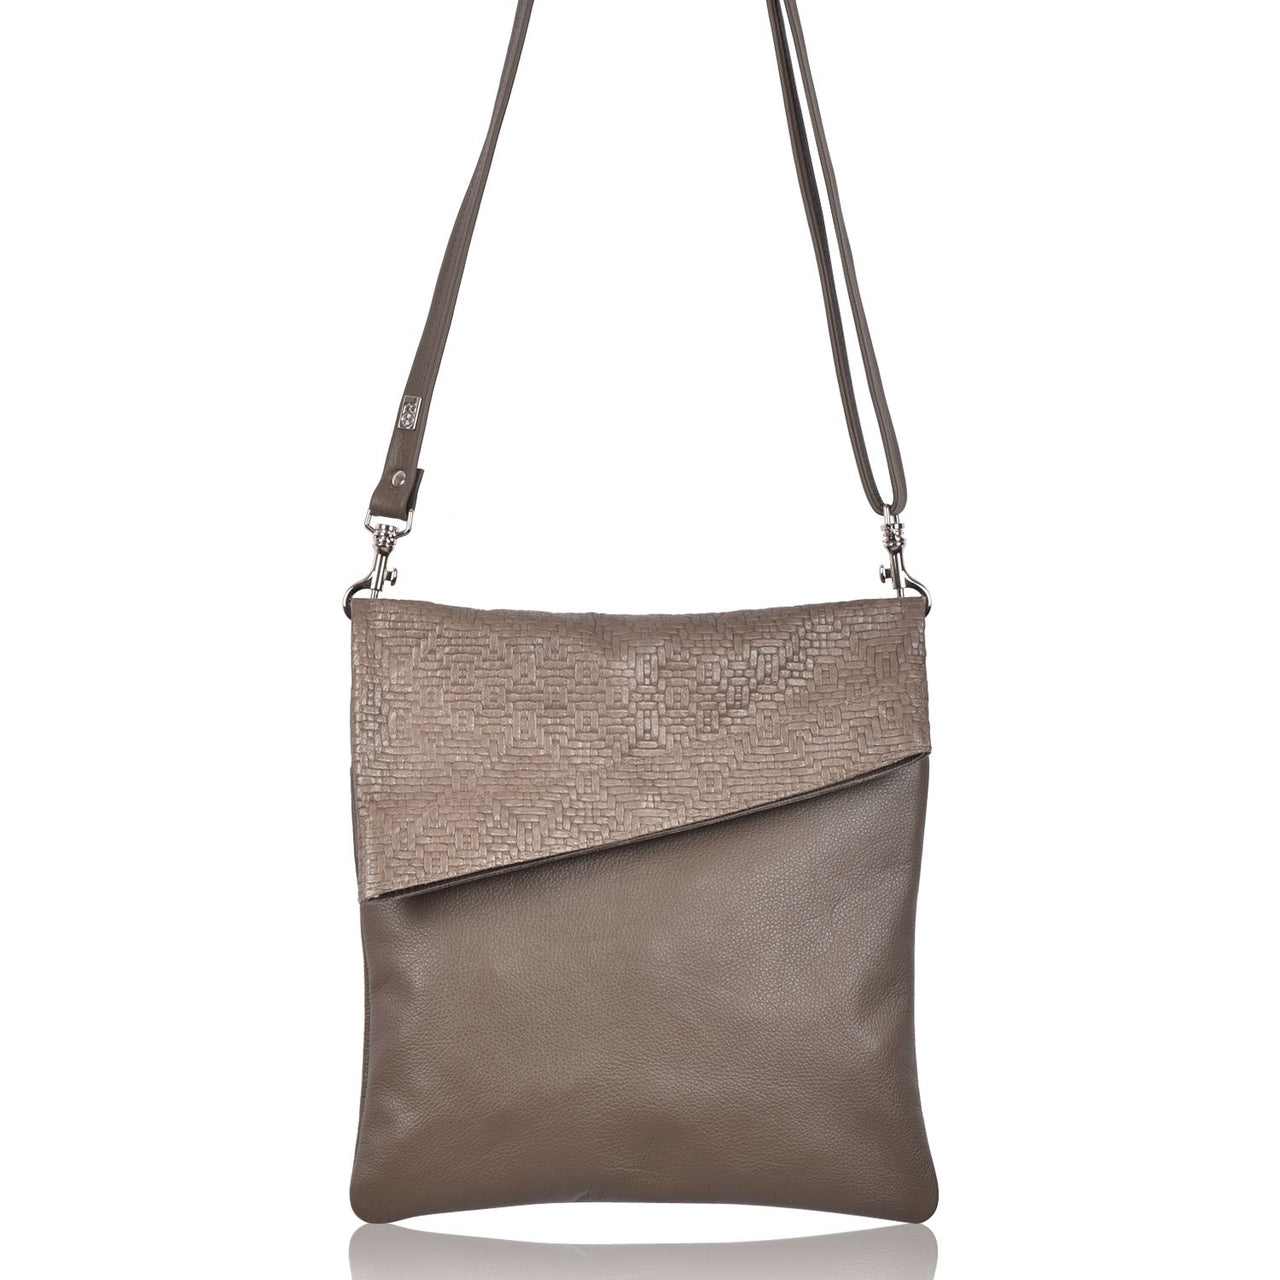 Owen Barry Z Top Sac Large Leather Crossbody Clay Bag